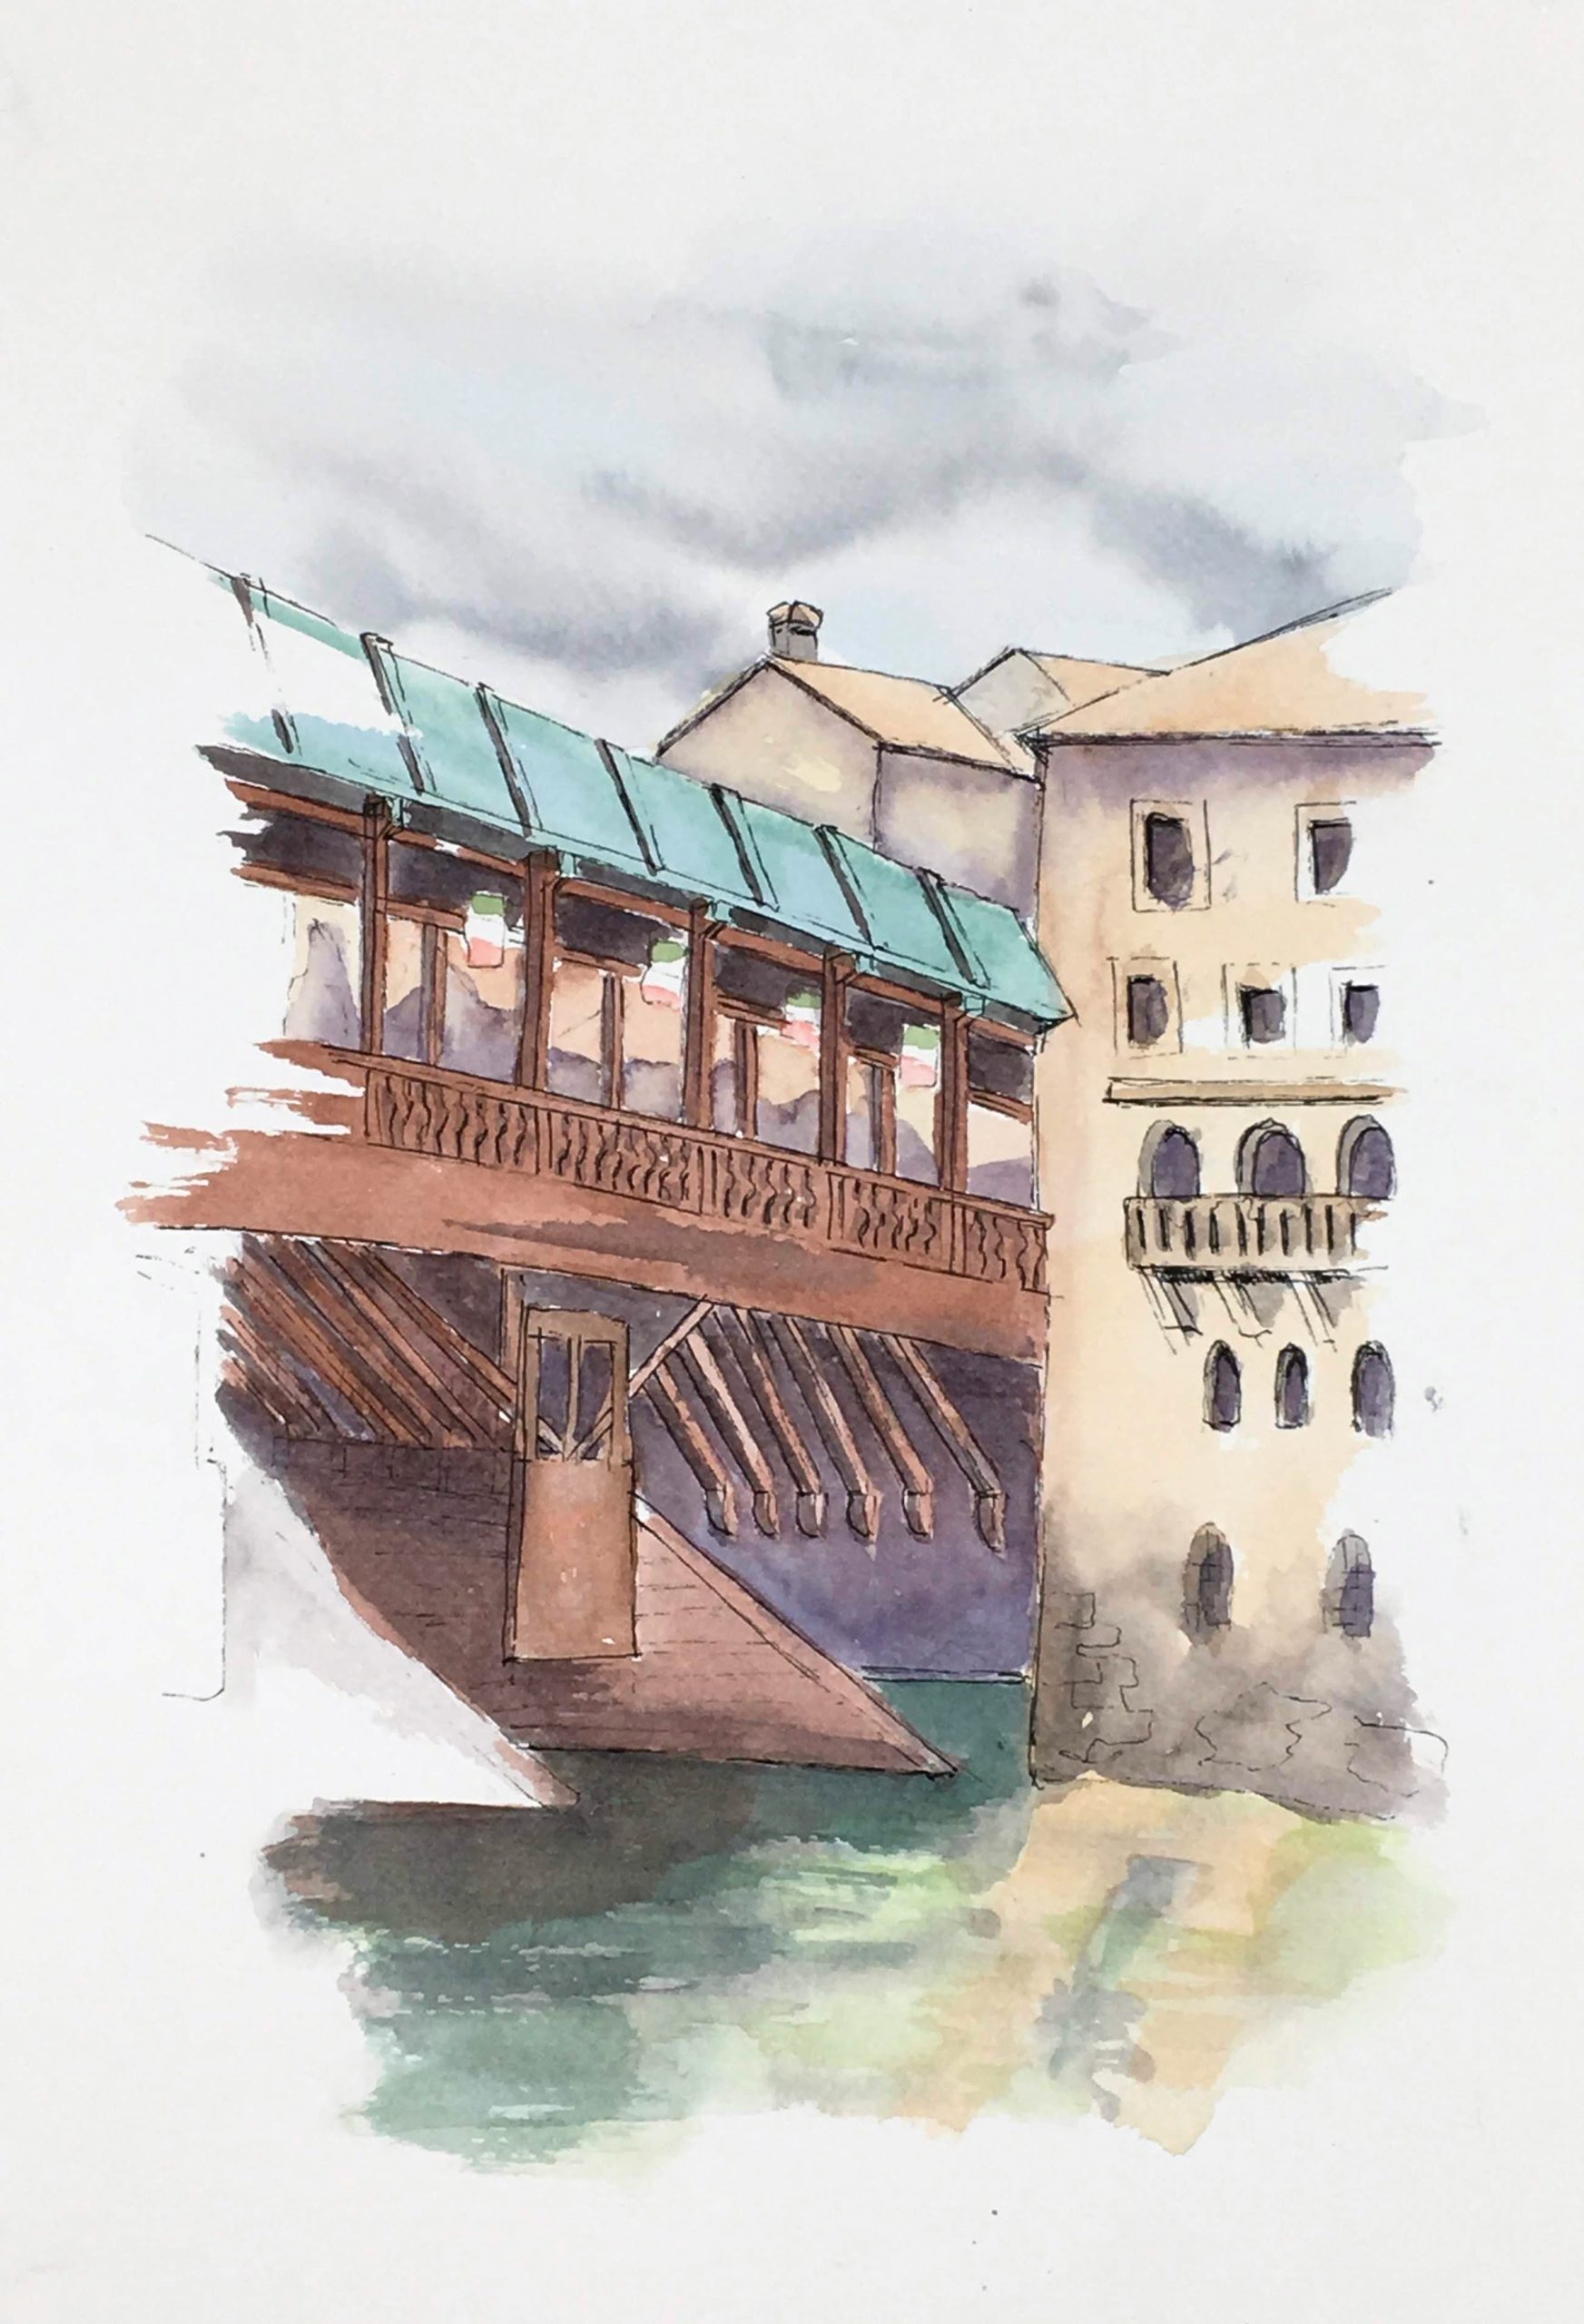 Painting of the Bridge of the Alpines in Bassano del Grappa